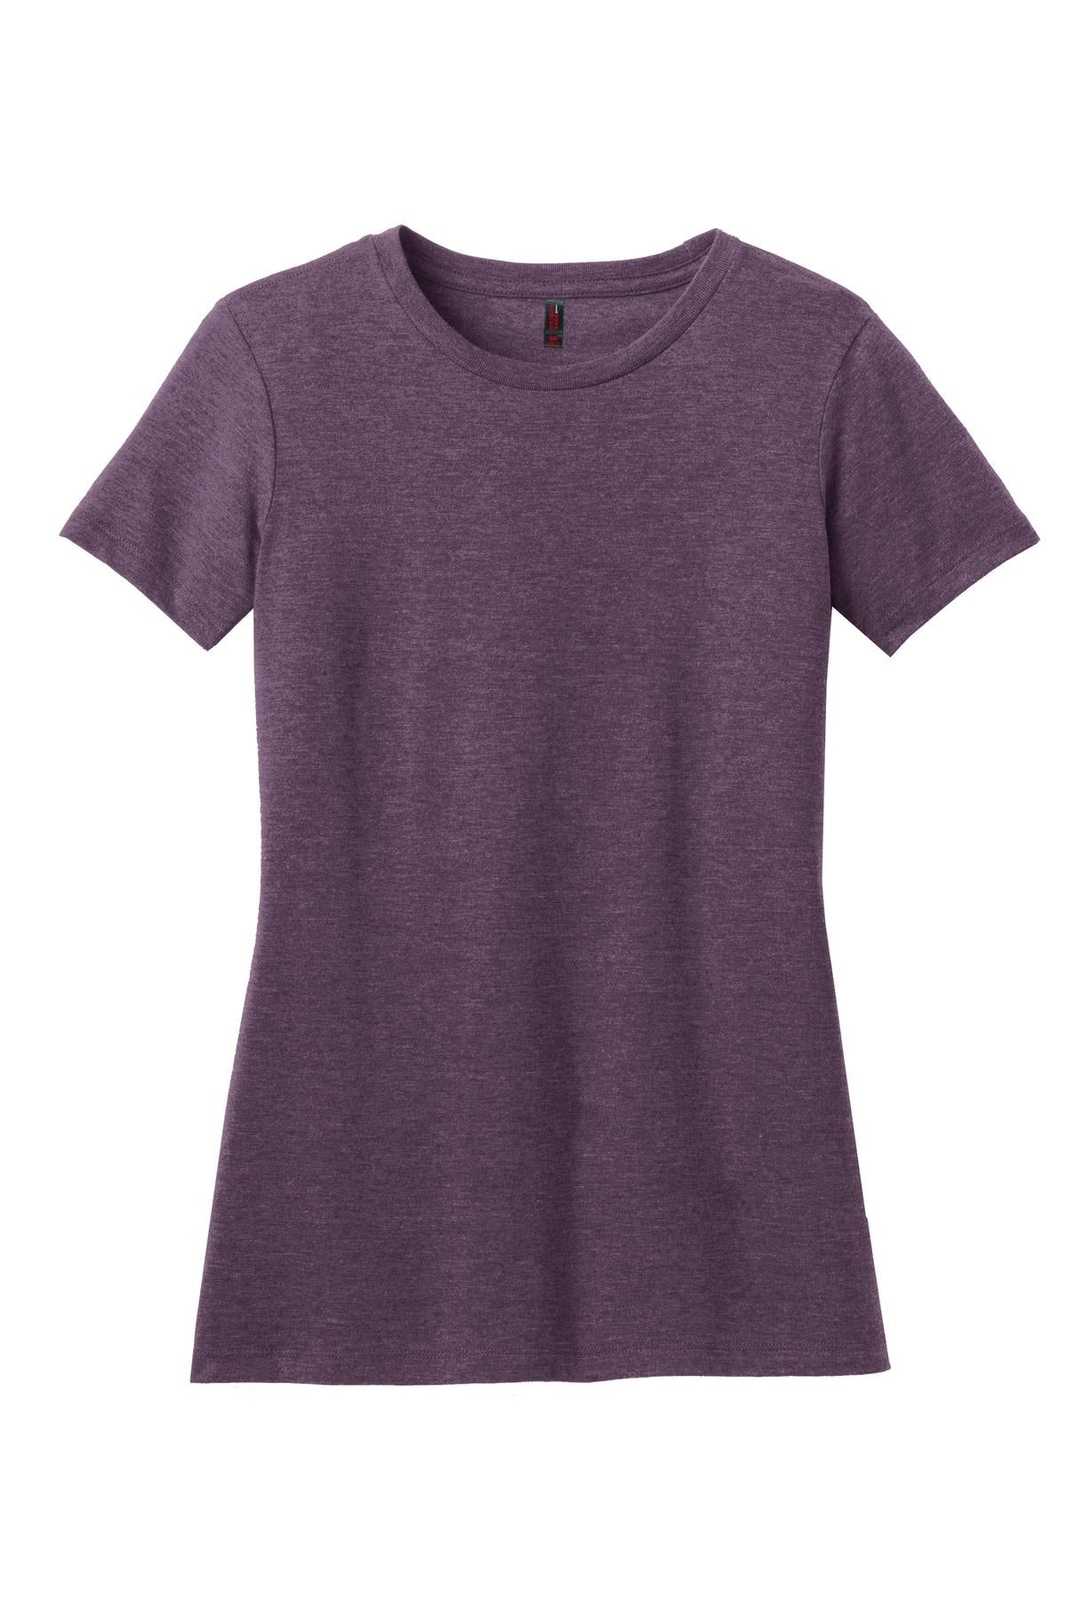 District DM108L Women's Perfect Blend Tee - Heathered Eggplant - HIT a Double - 1